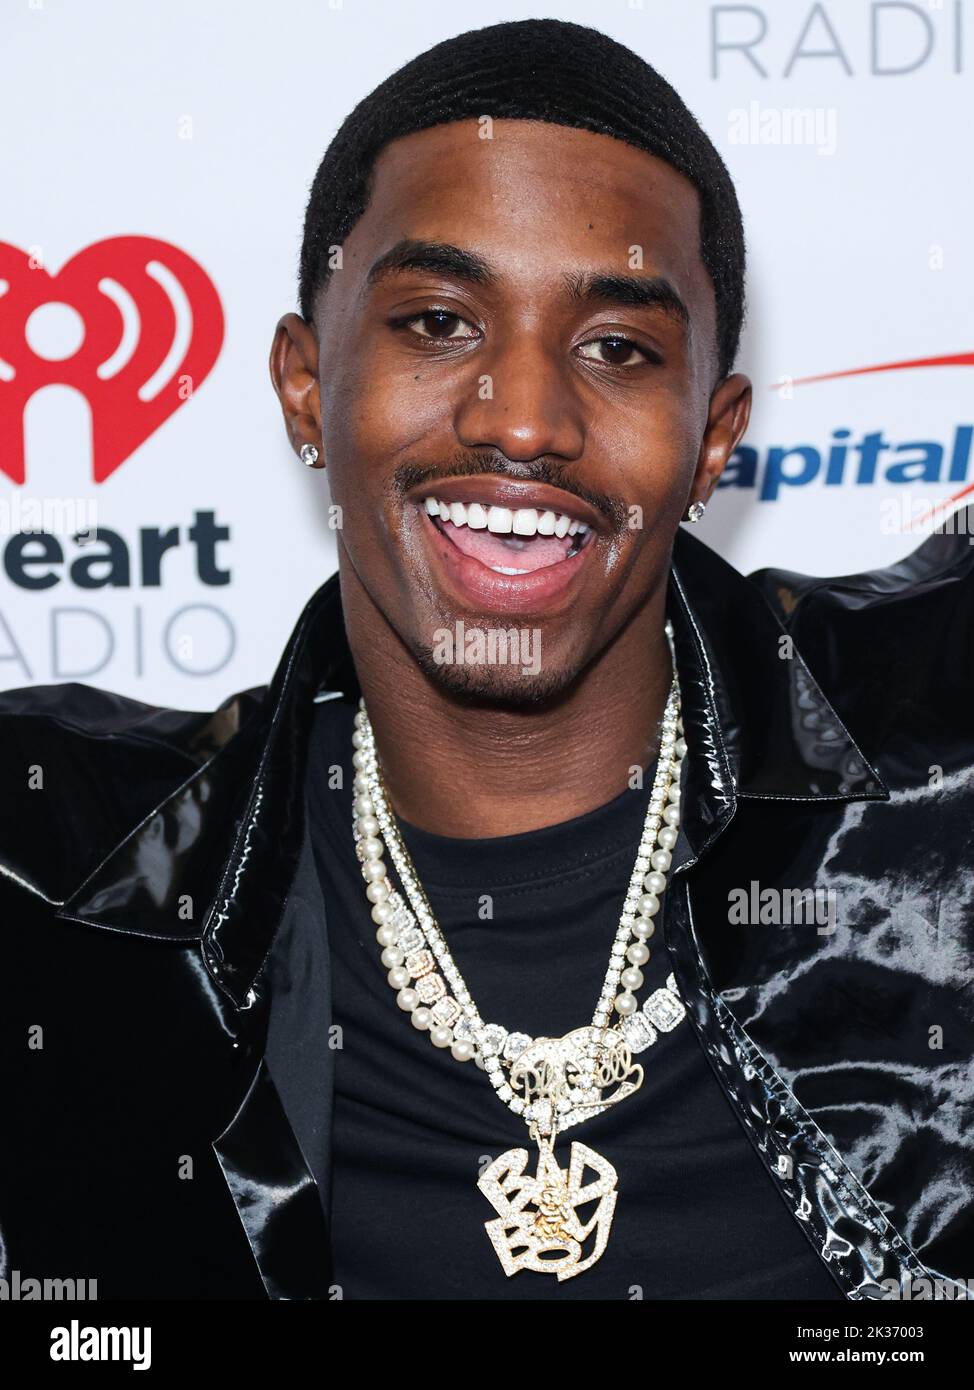 LAS VEGAS, NEVADA, USA - SEPTEMBER 24: King Combs (Christian Casey Combs) poses in the press room at the 2022 iHeartRadio Music Festival - Night 2 held at the T-Mobile Arena on September 24, 2022 in Las Vegas, Nevada, United States. (Photo by Xavier Collin/Image Press Agency) Stock Photo